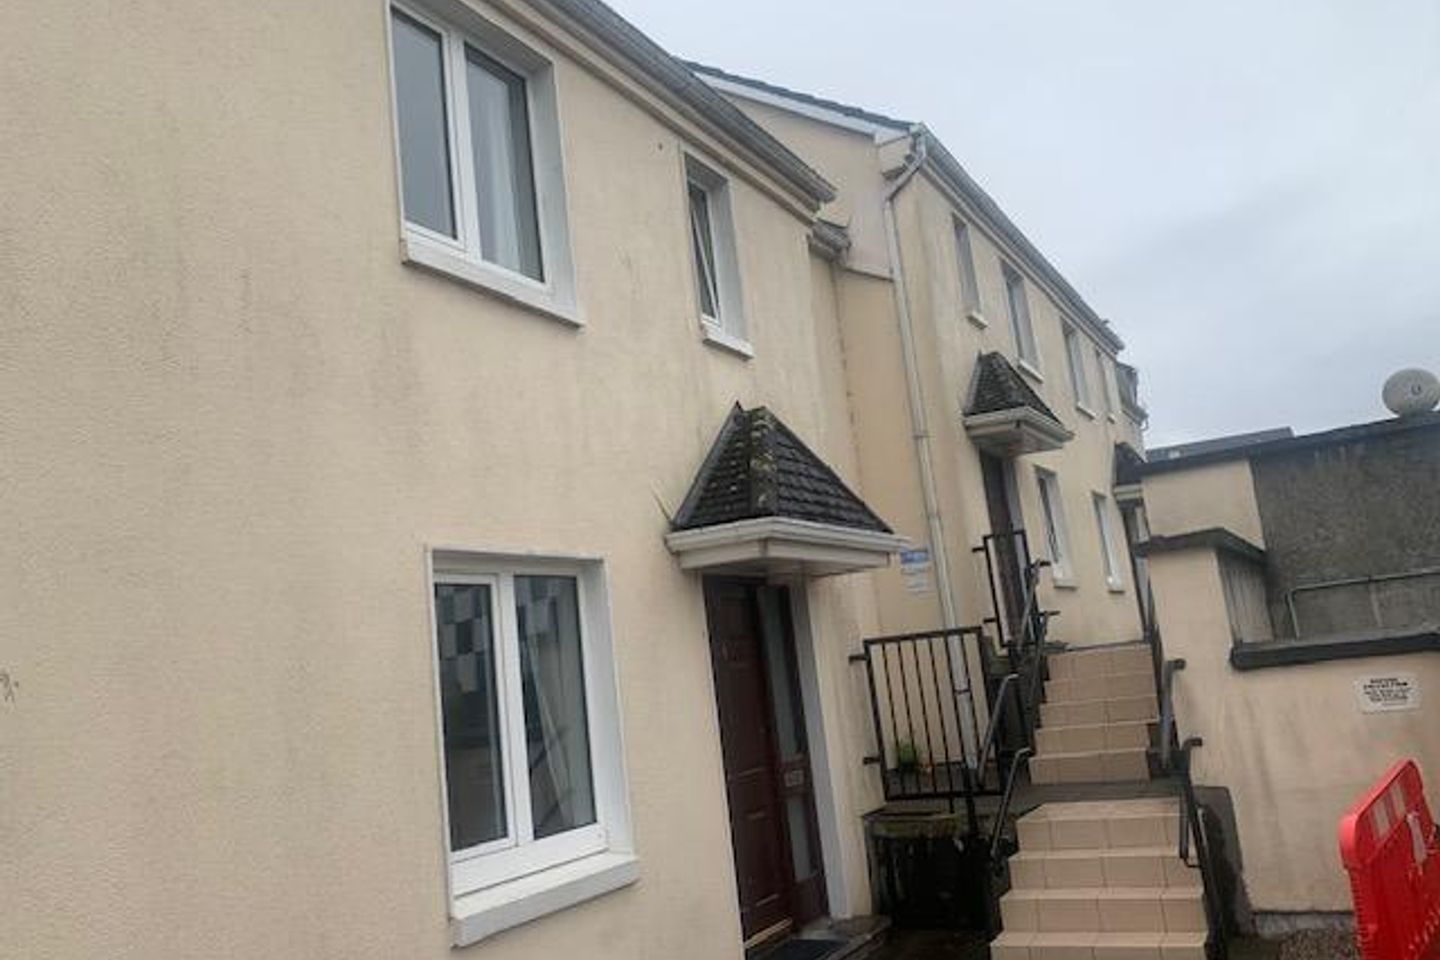 Apartment 5, Arus Guaire, Galway City, Co. Galway, H91WV62